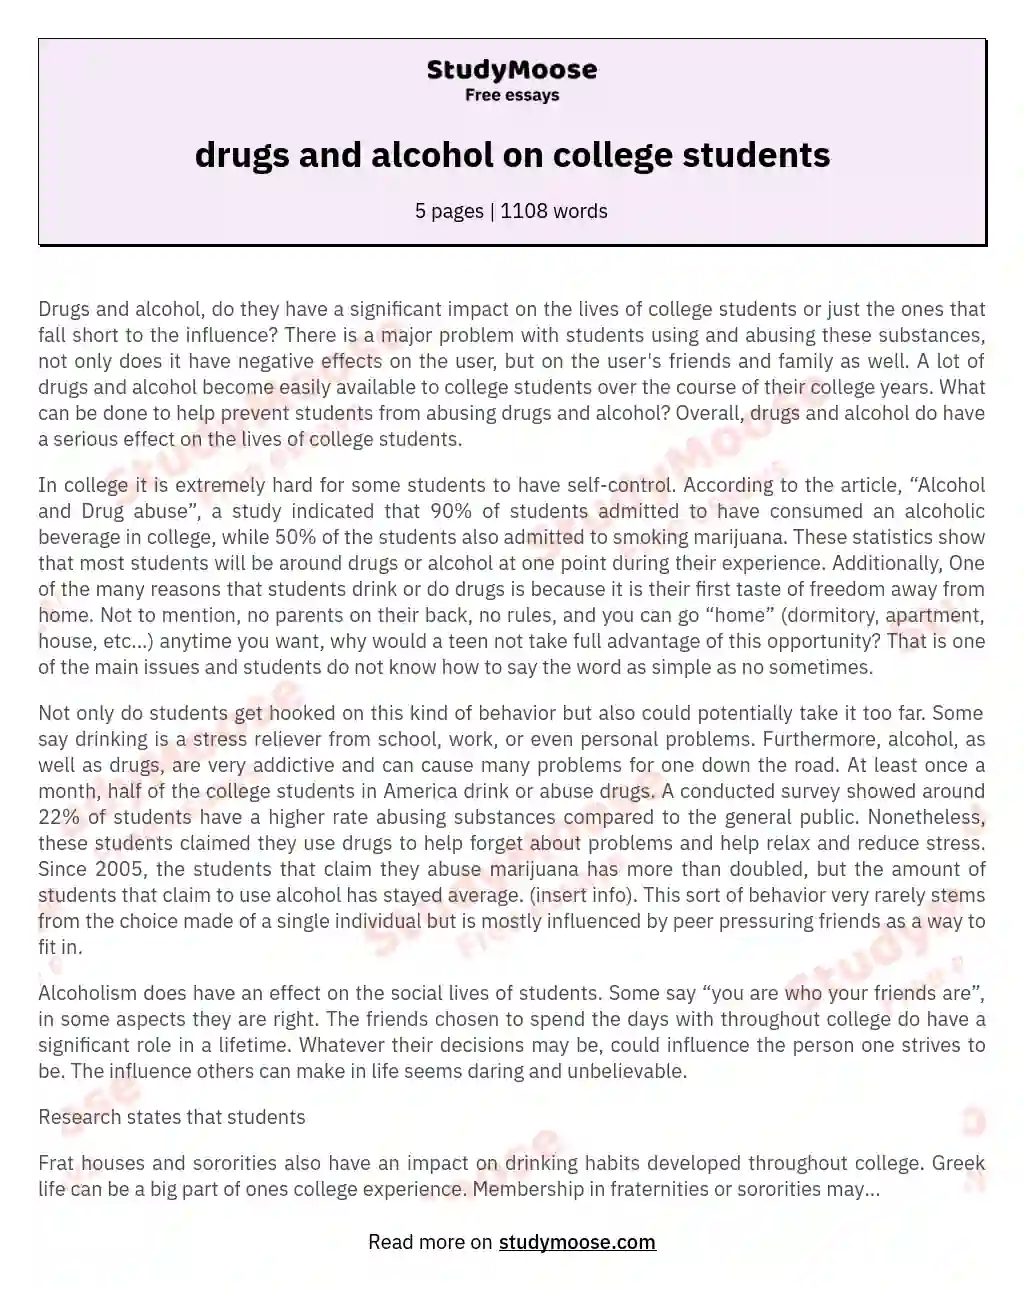 drugs and alcohol on college students essay